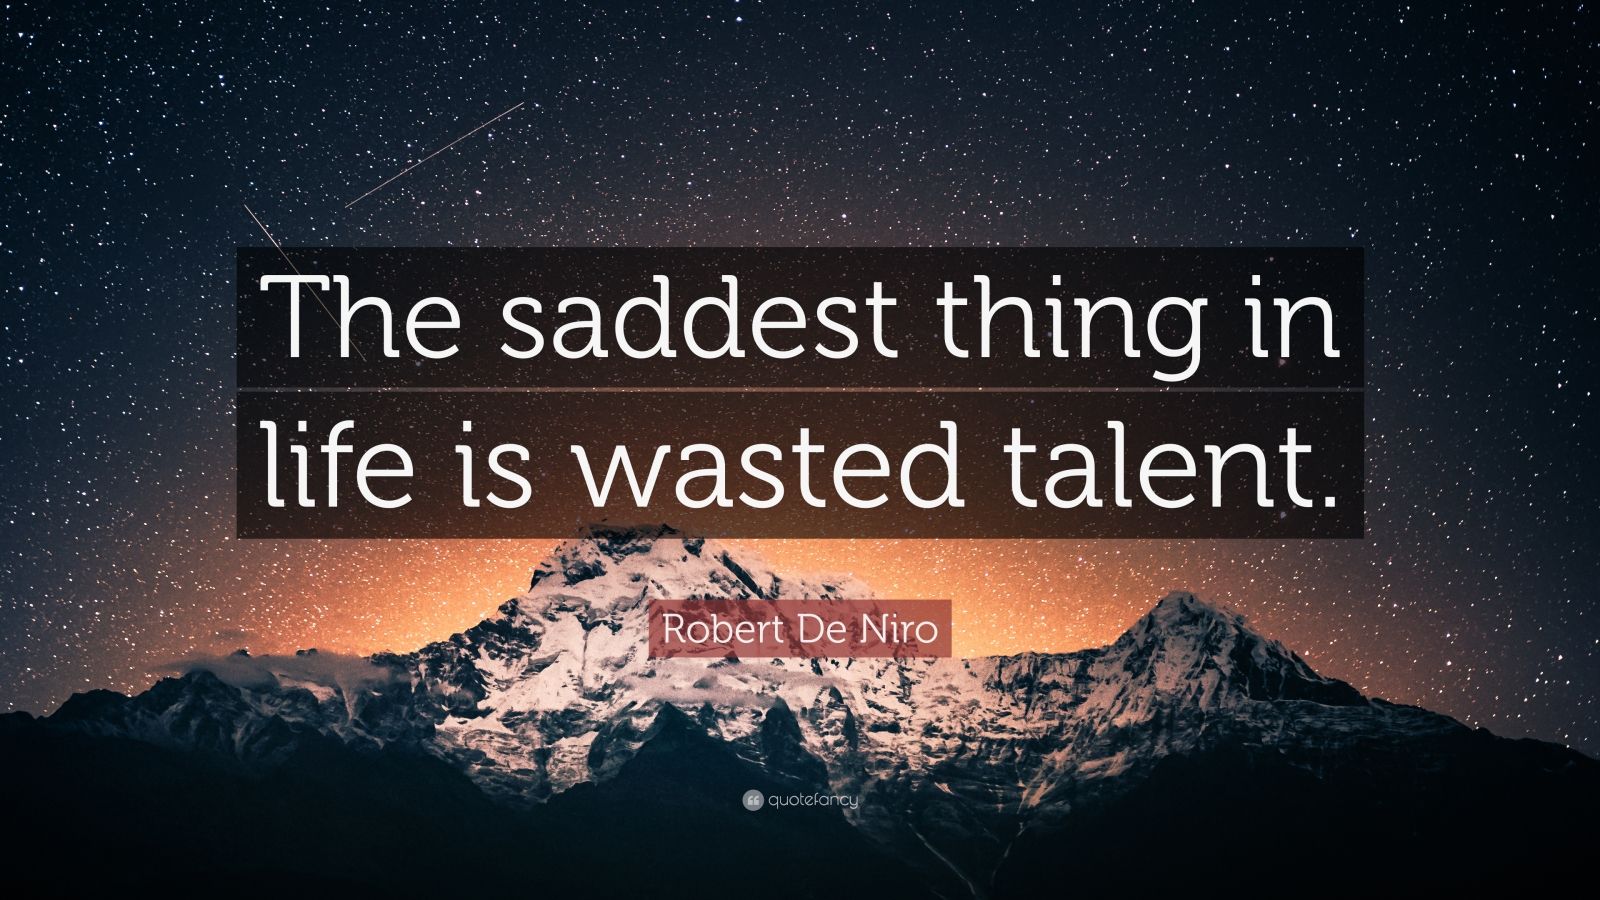 Wasted Talent Quote Robert De Niro Quote "The saddest thing in life